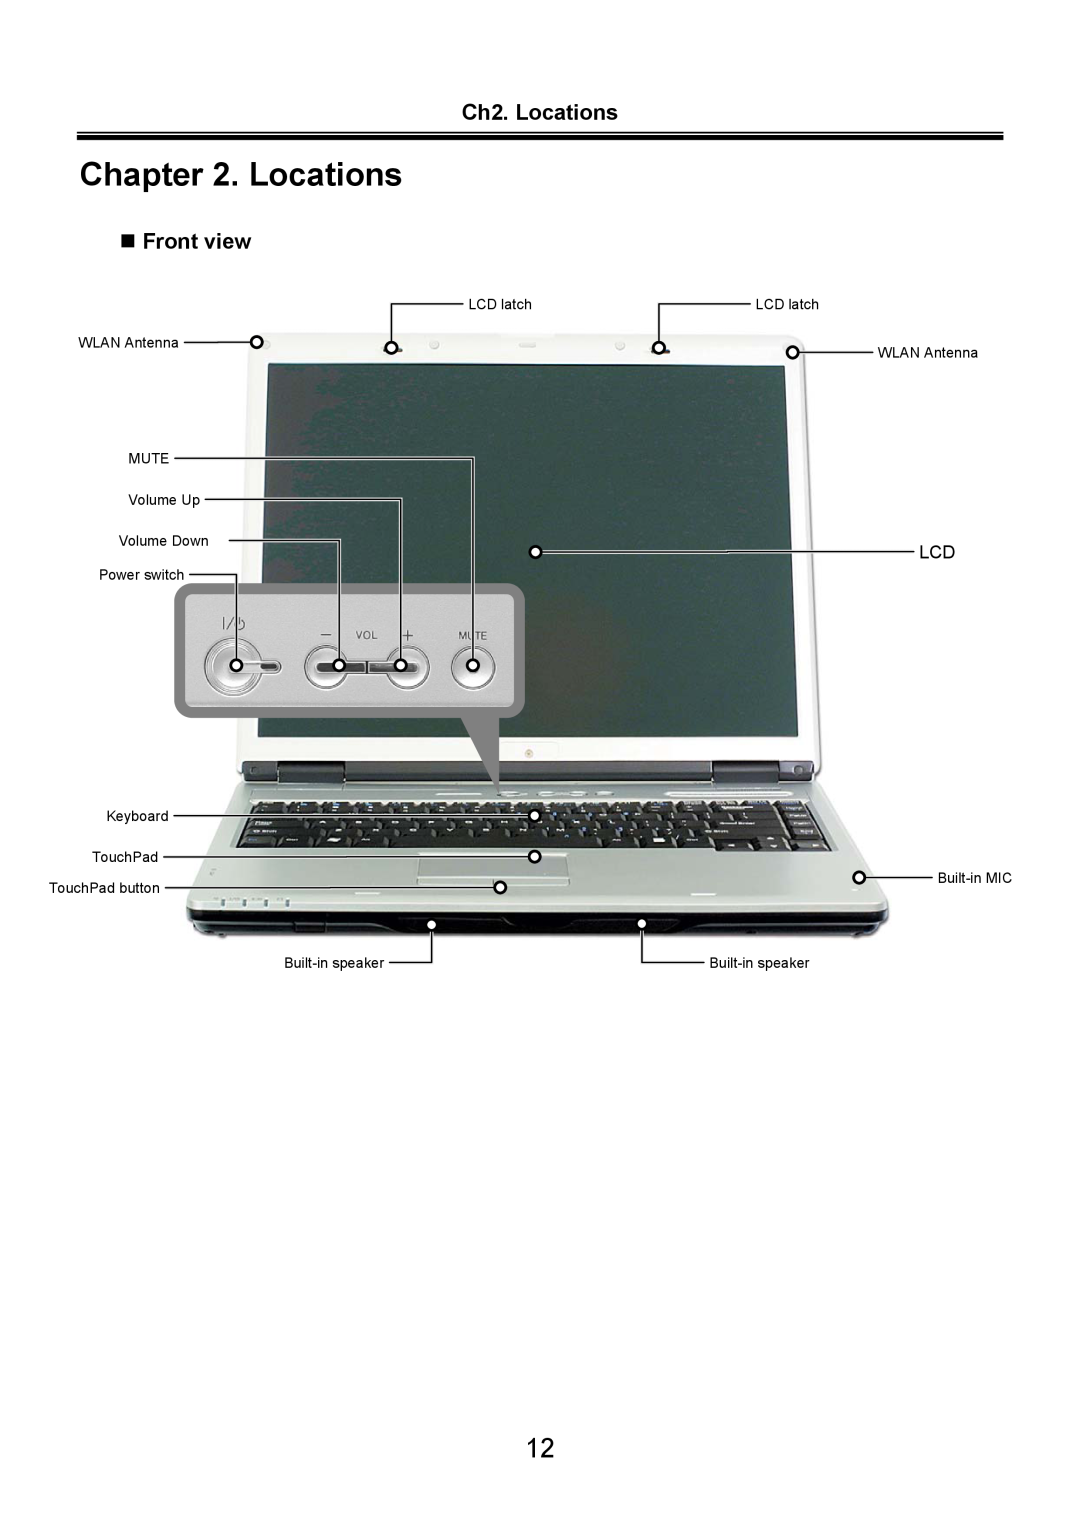 LG Electronics LS70 service manual Ch2. Locations, „ Front view 